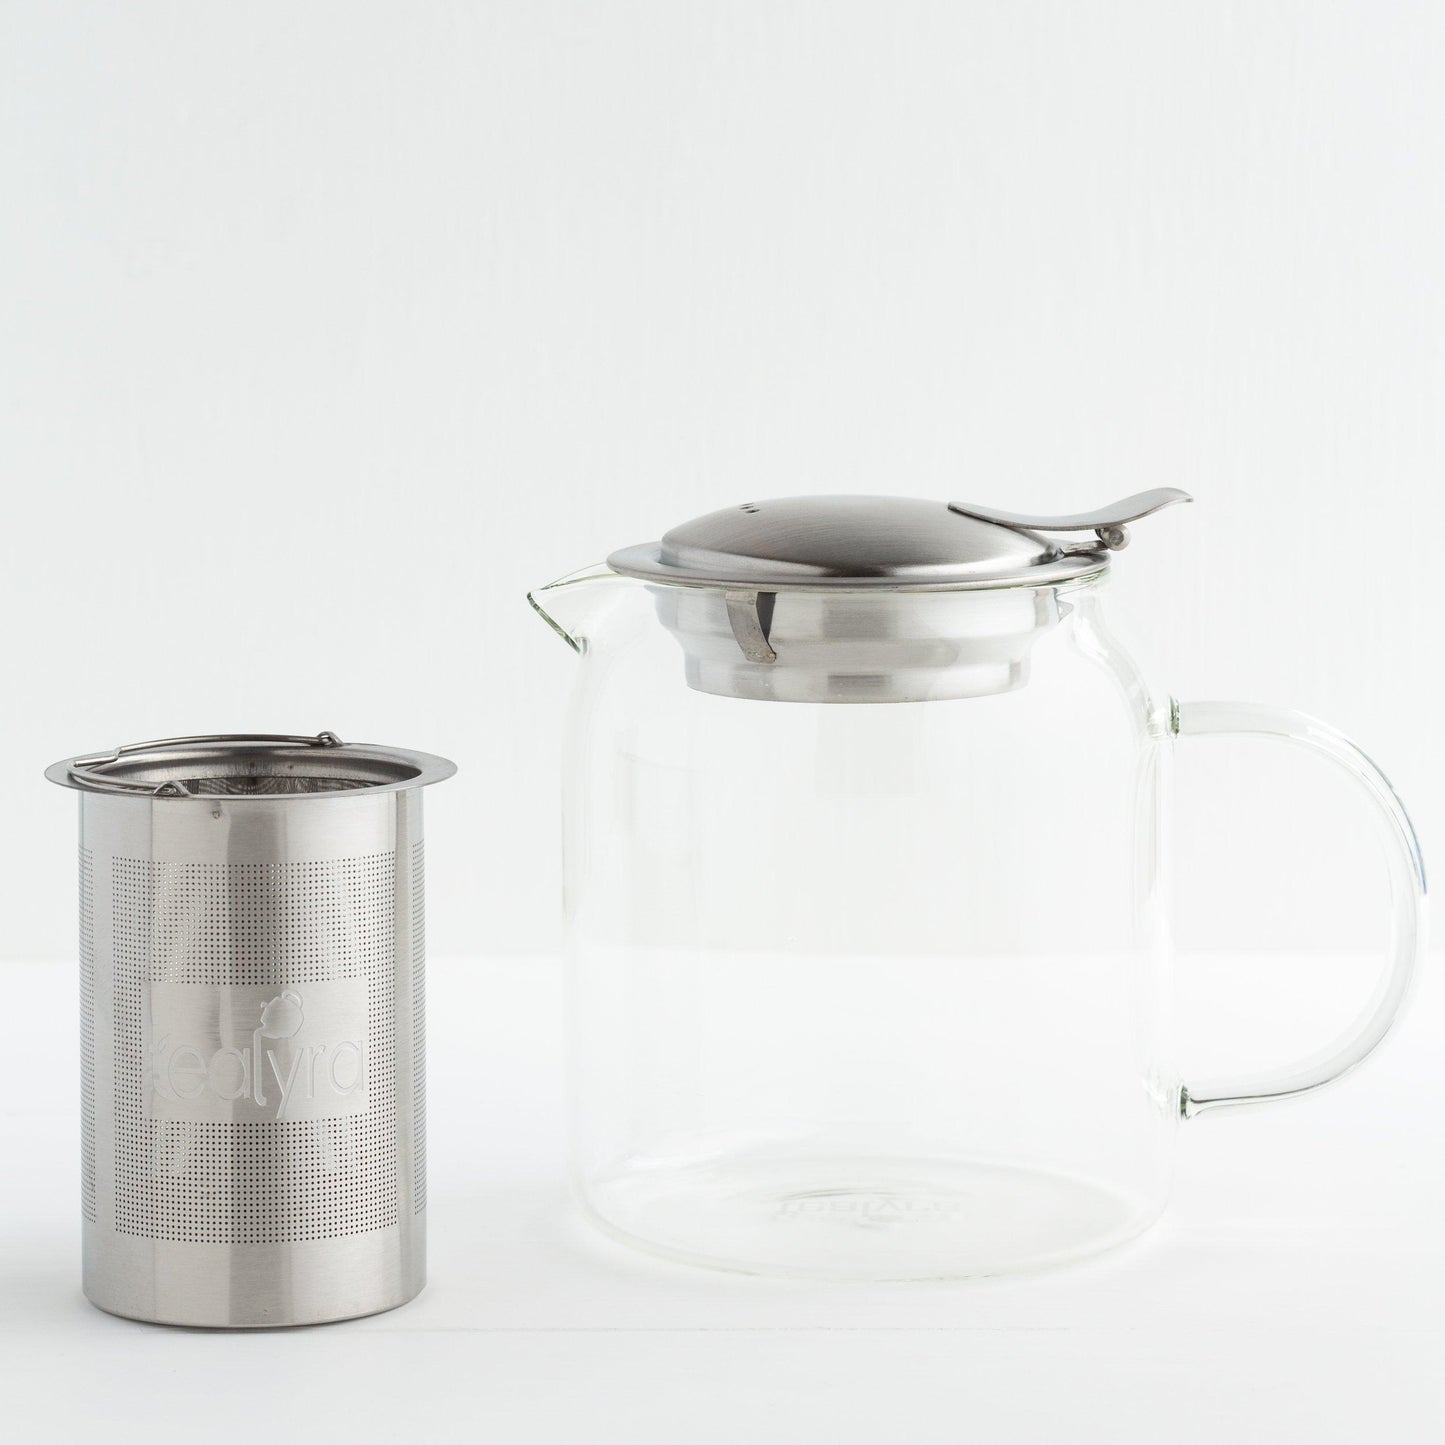 Glass Teapot with Stainless Steel Infuser shown with the infuser outside of the teapot